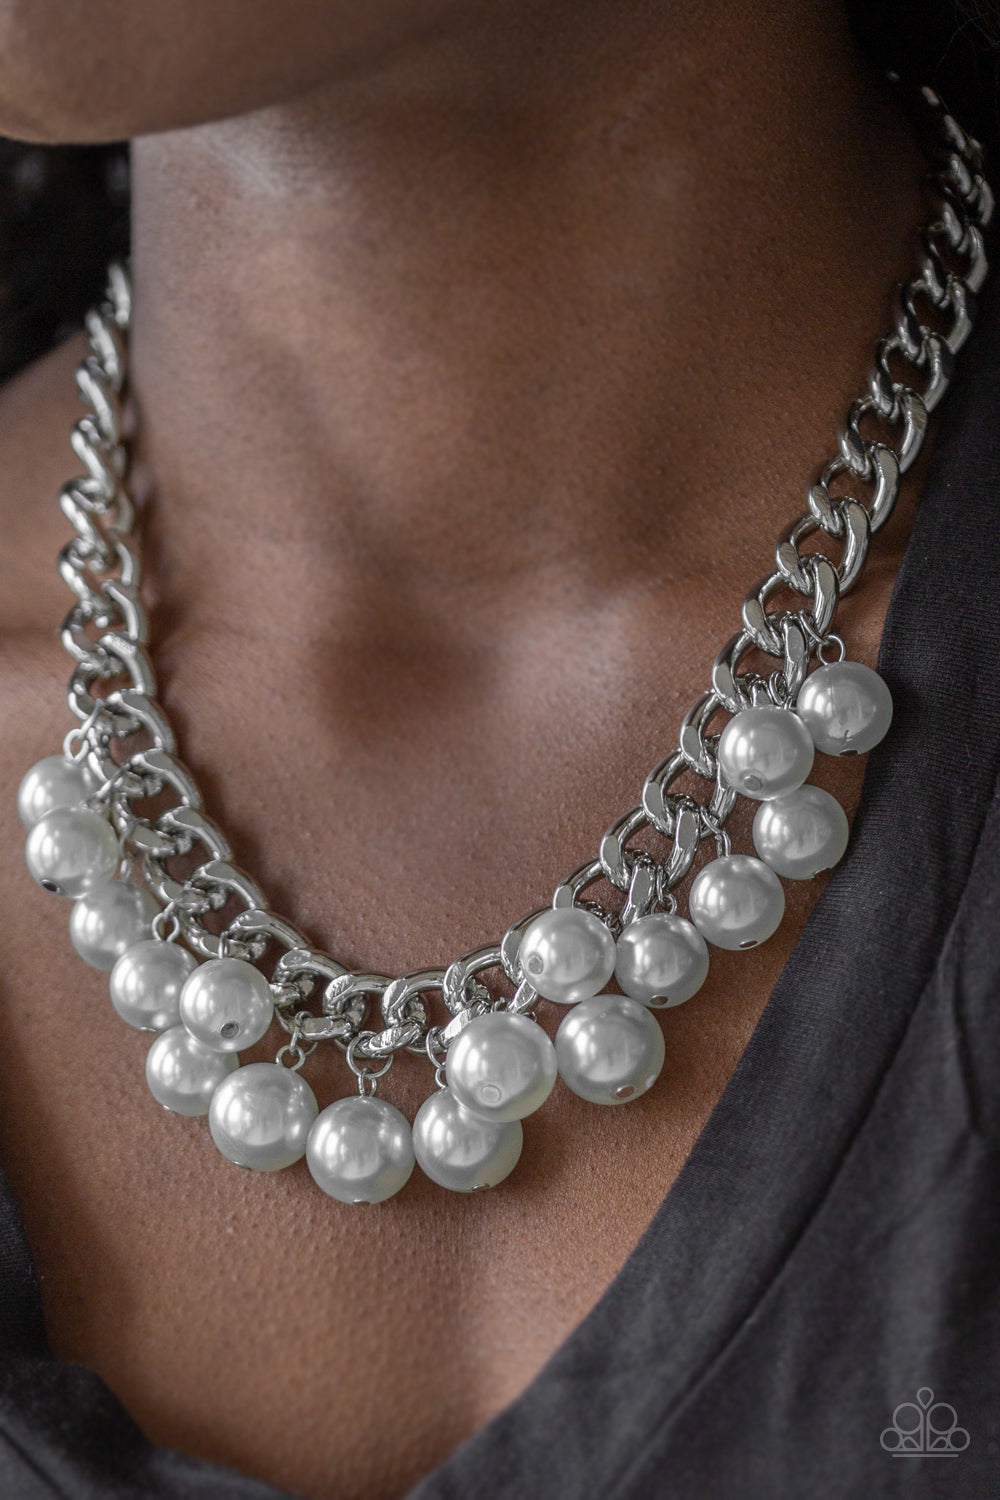 Get Off My Runway - Silver Pearl Necklace - Paparazzi Accessories - Bubbly silver pearls swing from the bottom of a hefty silver chain, creating a dramatic fringe below the collar. Features an adjustable clasp closure.